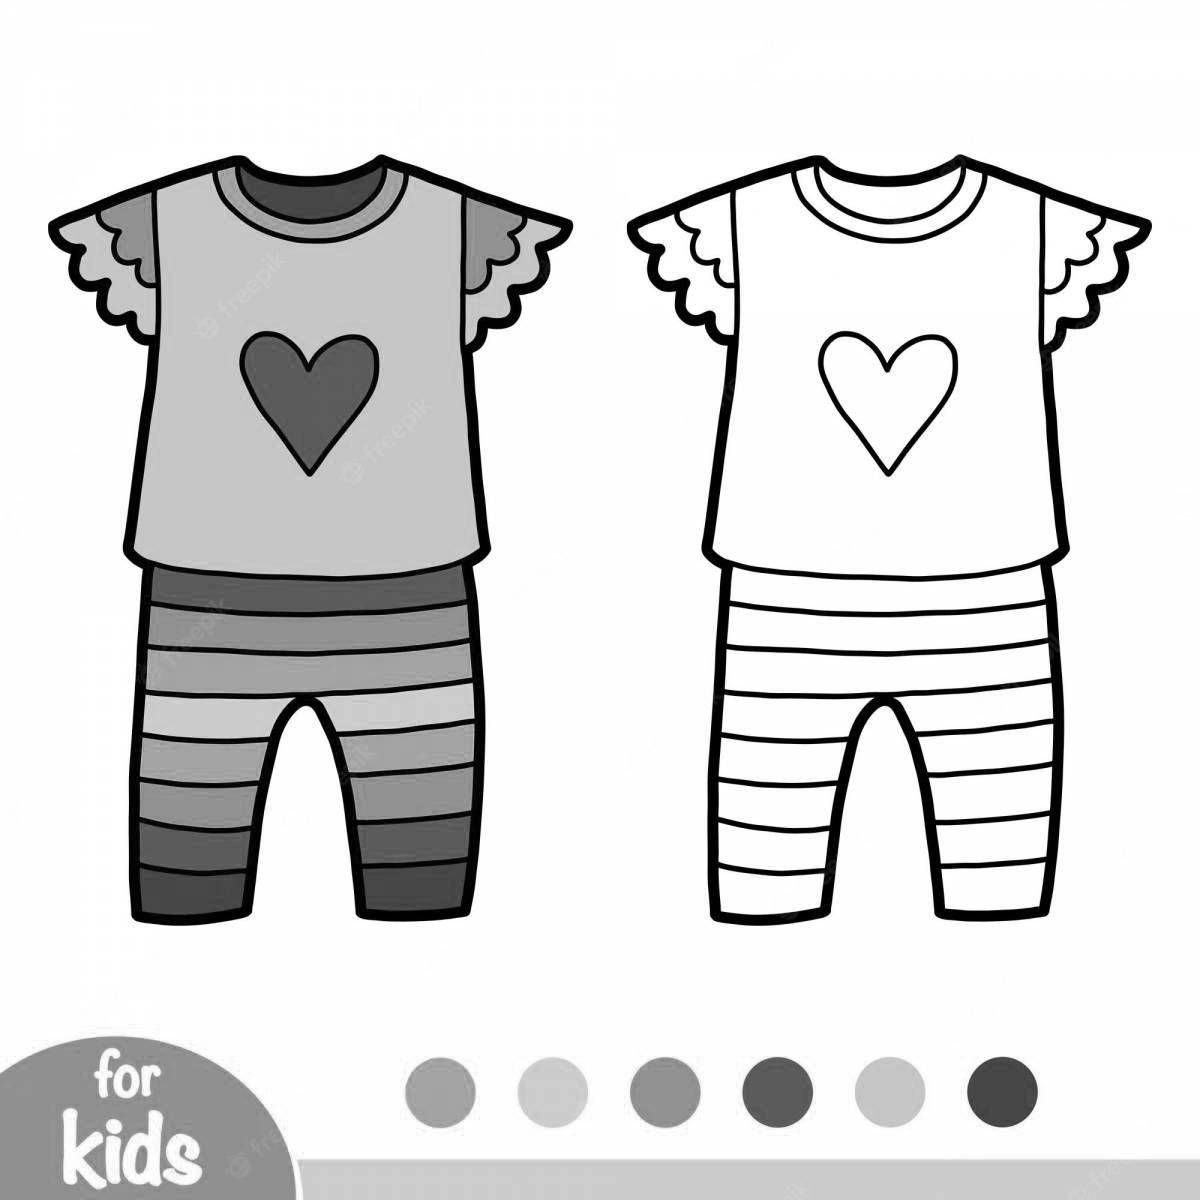 Colorful pajamas for children